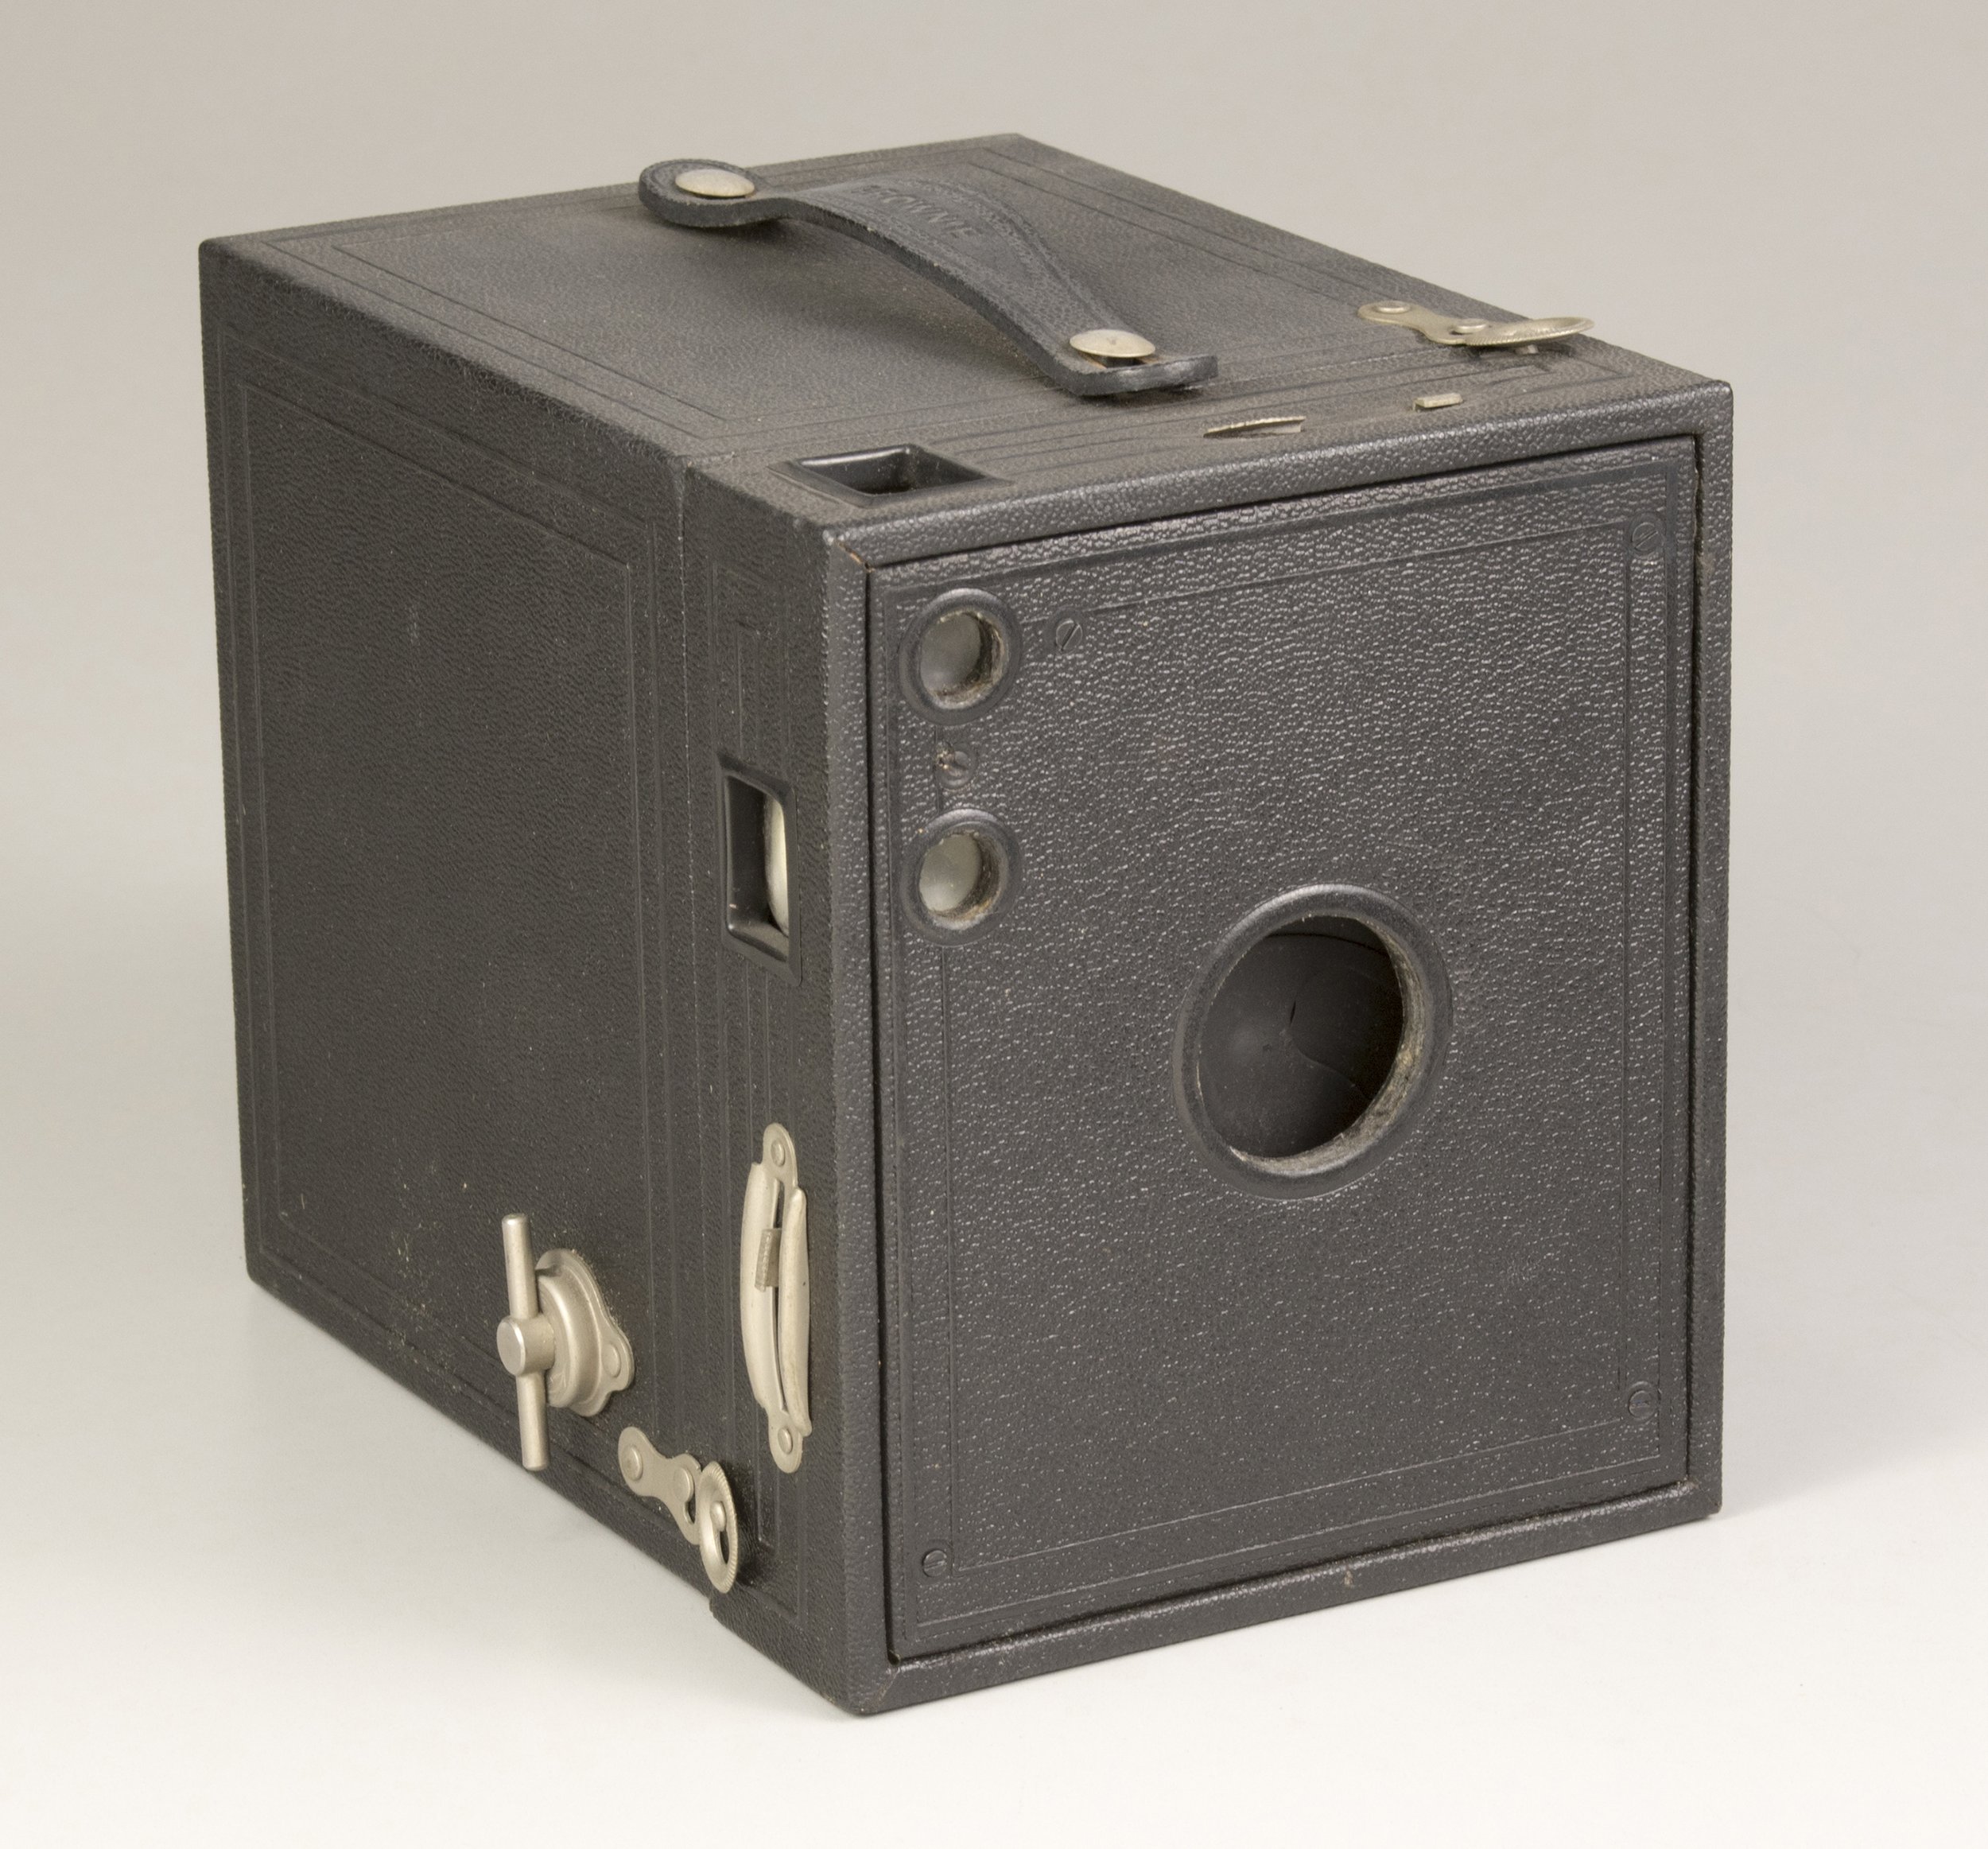 Kodak No. 3 Brownie was one of the cameras my mother would have used as a young girl in the 1920's